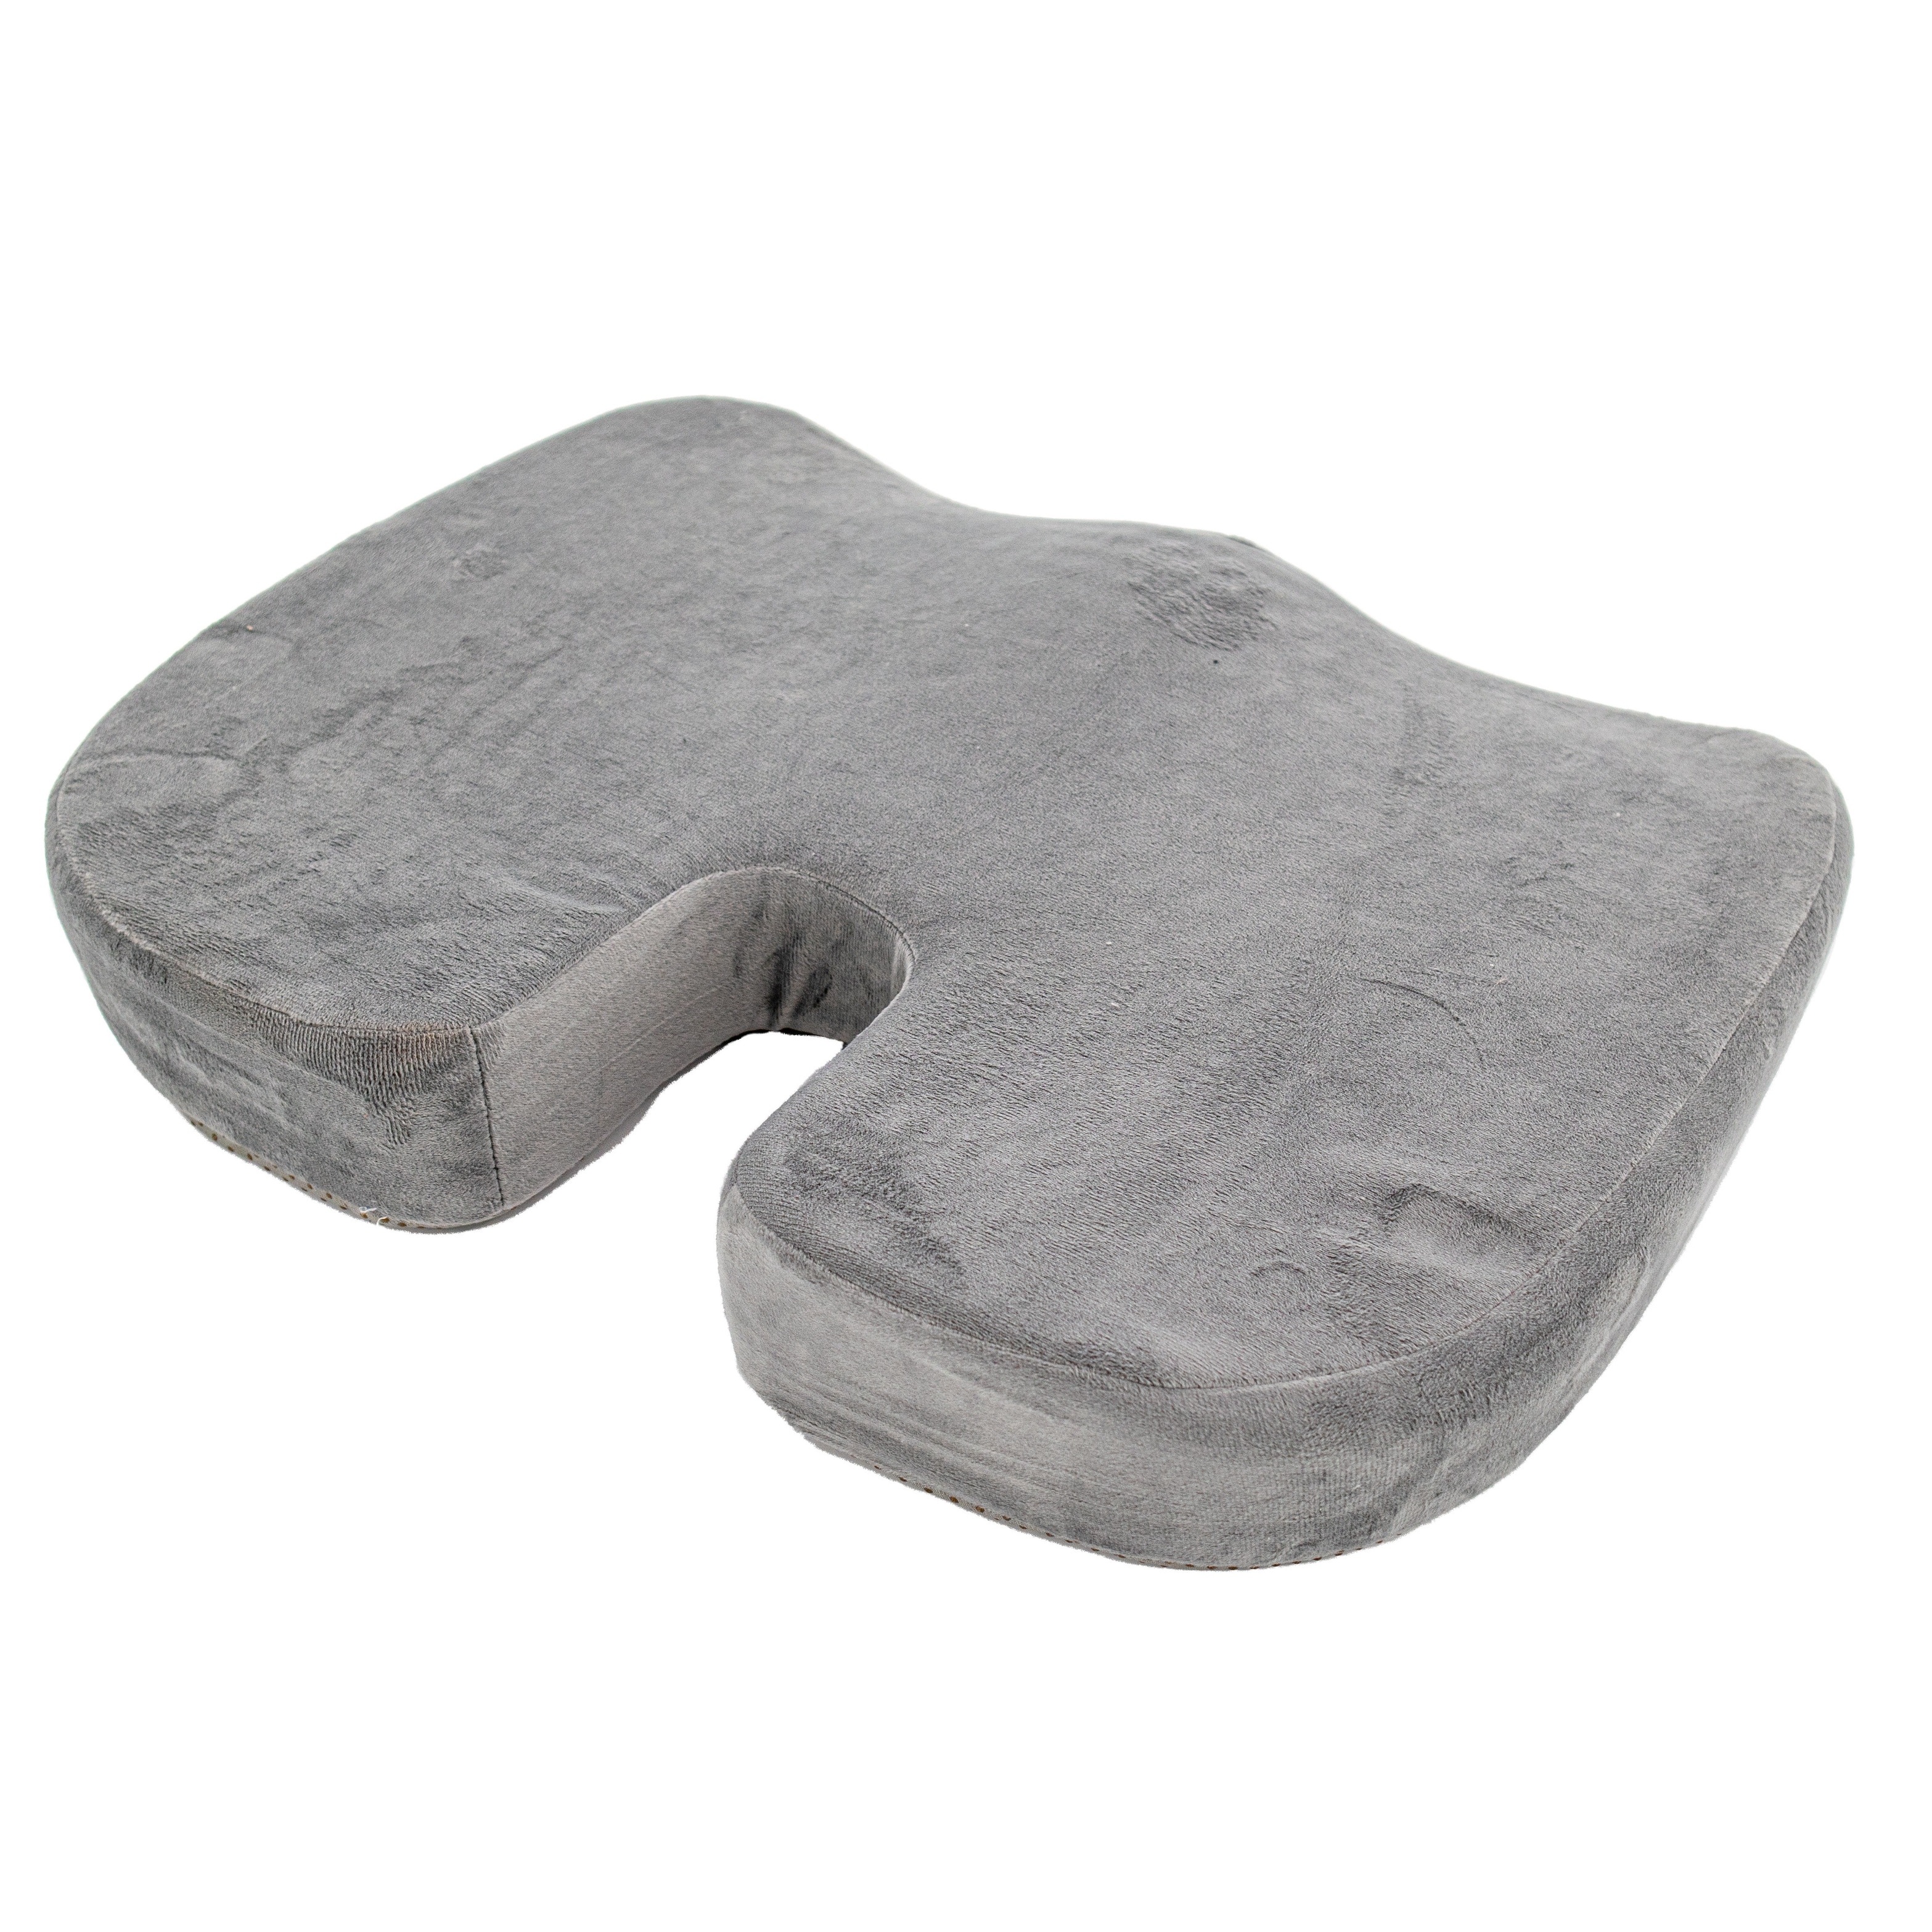 Seat Cushion W/ Cooling Gel for Tailbone Pain Relief (Gray